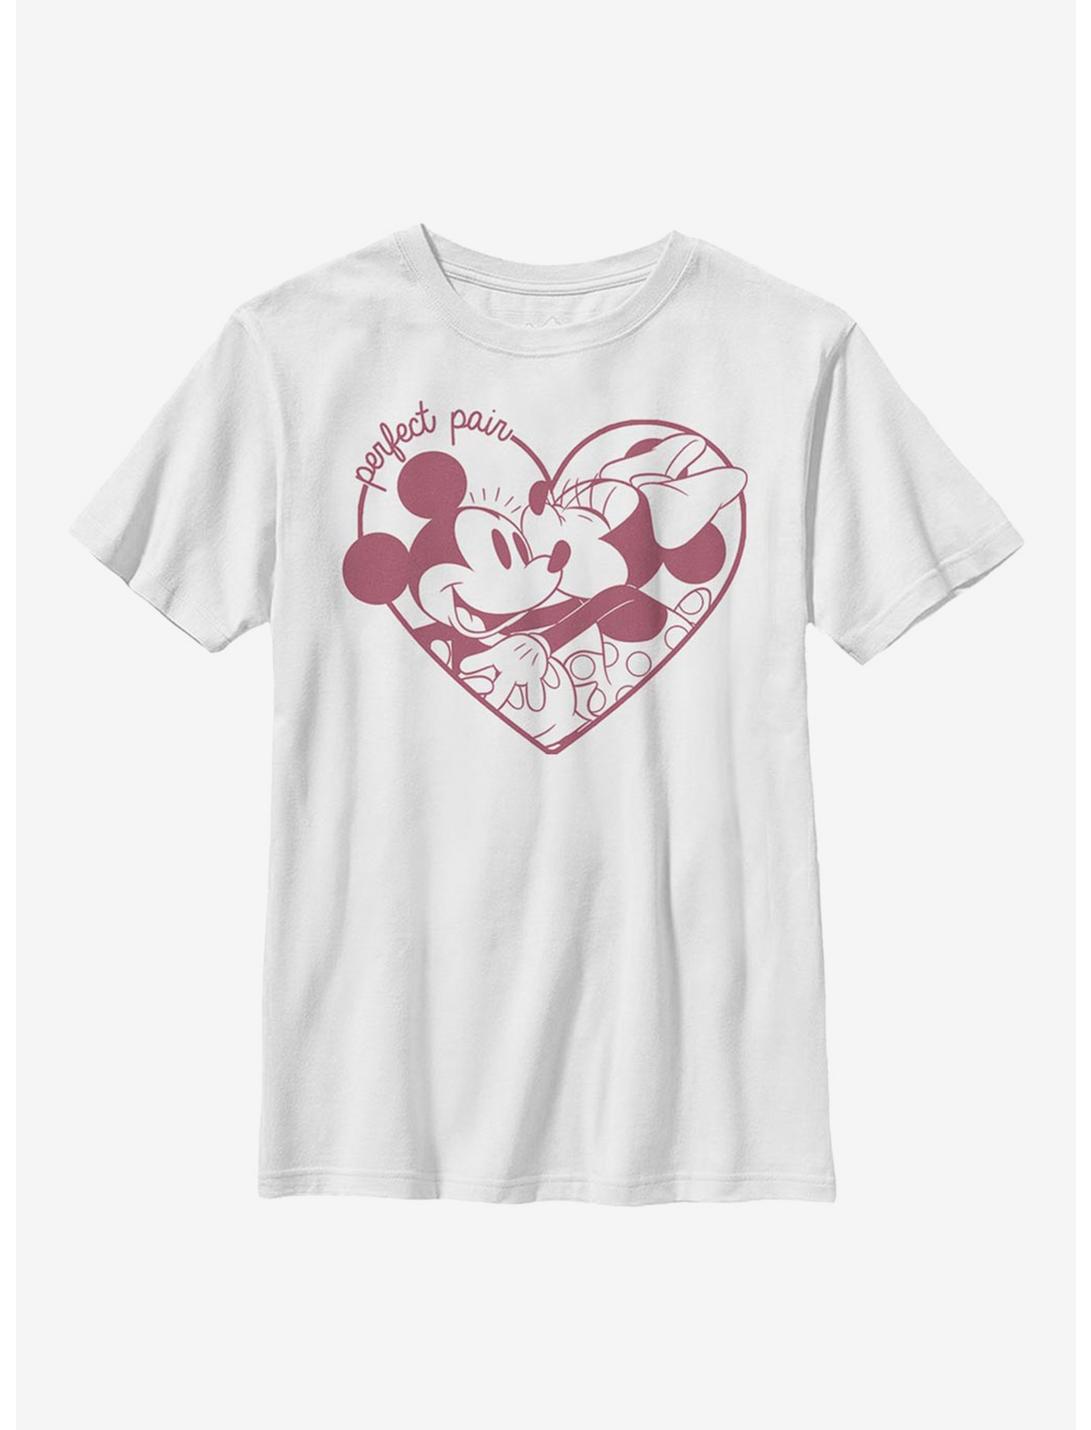 Disney Mickey Mouse Perfect Pair Youth T-Shirt, WHITE, hi-res